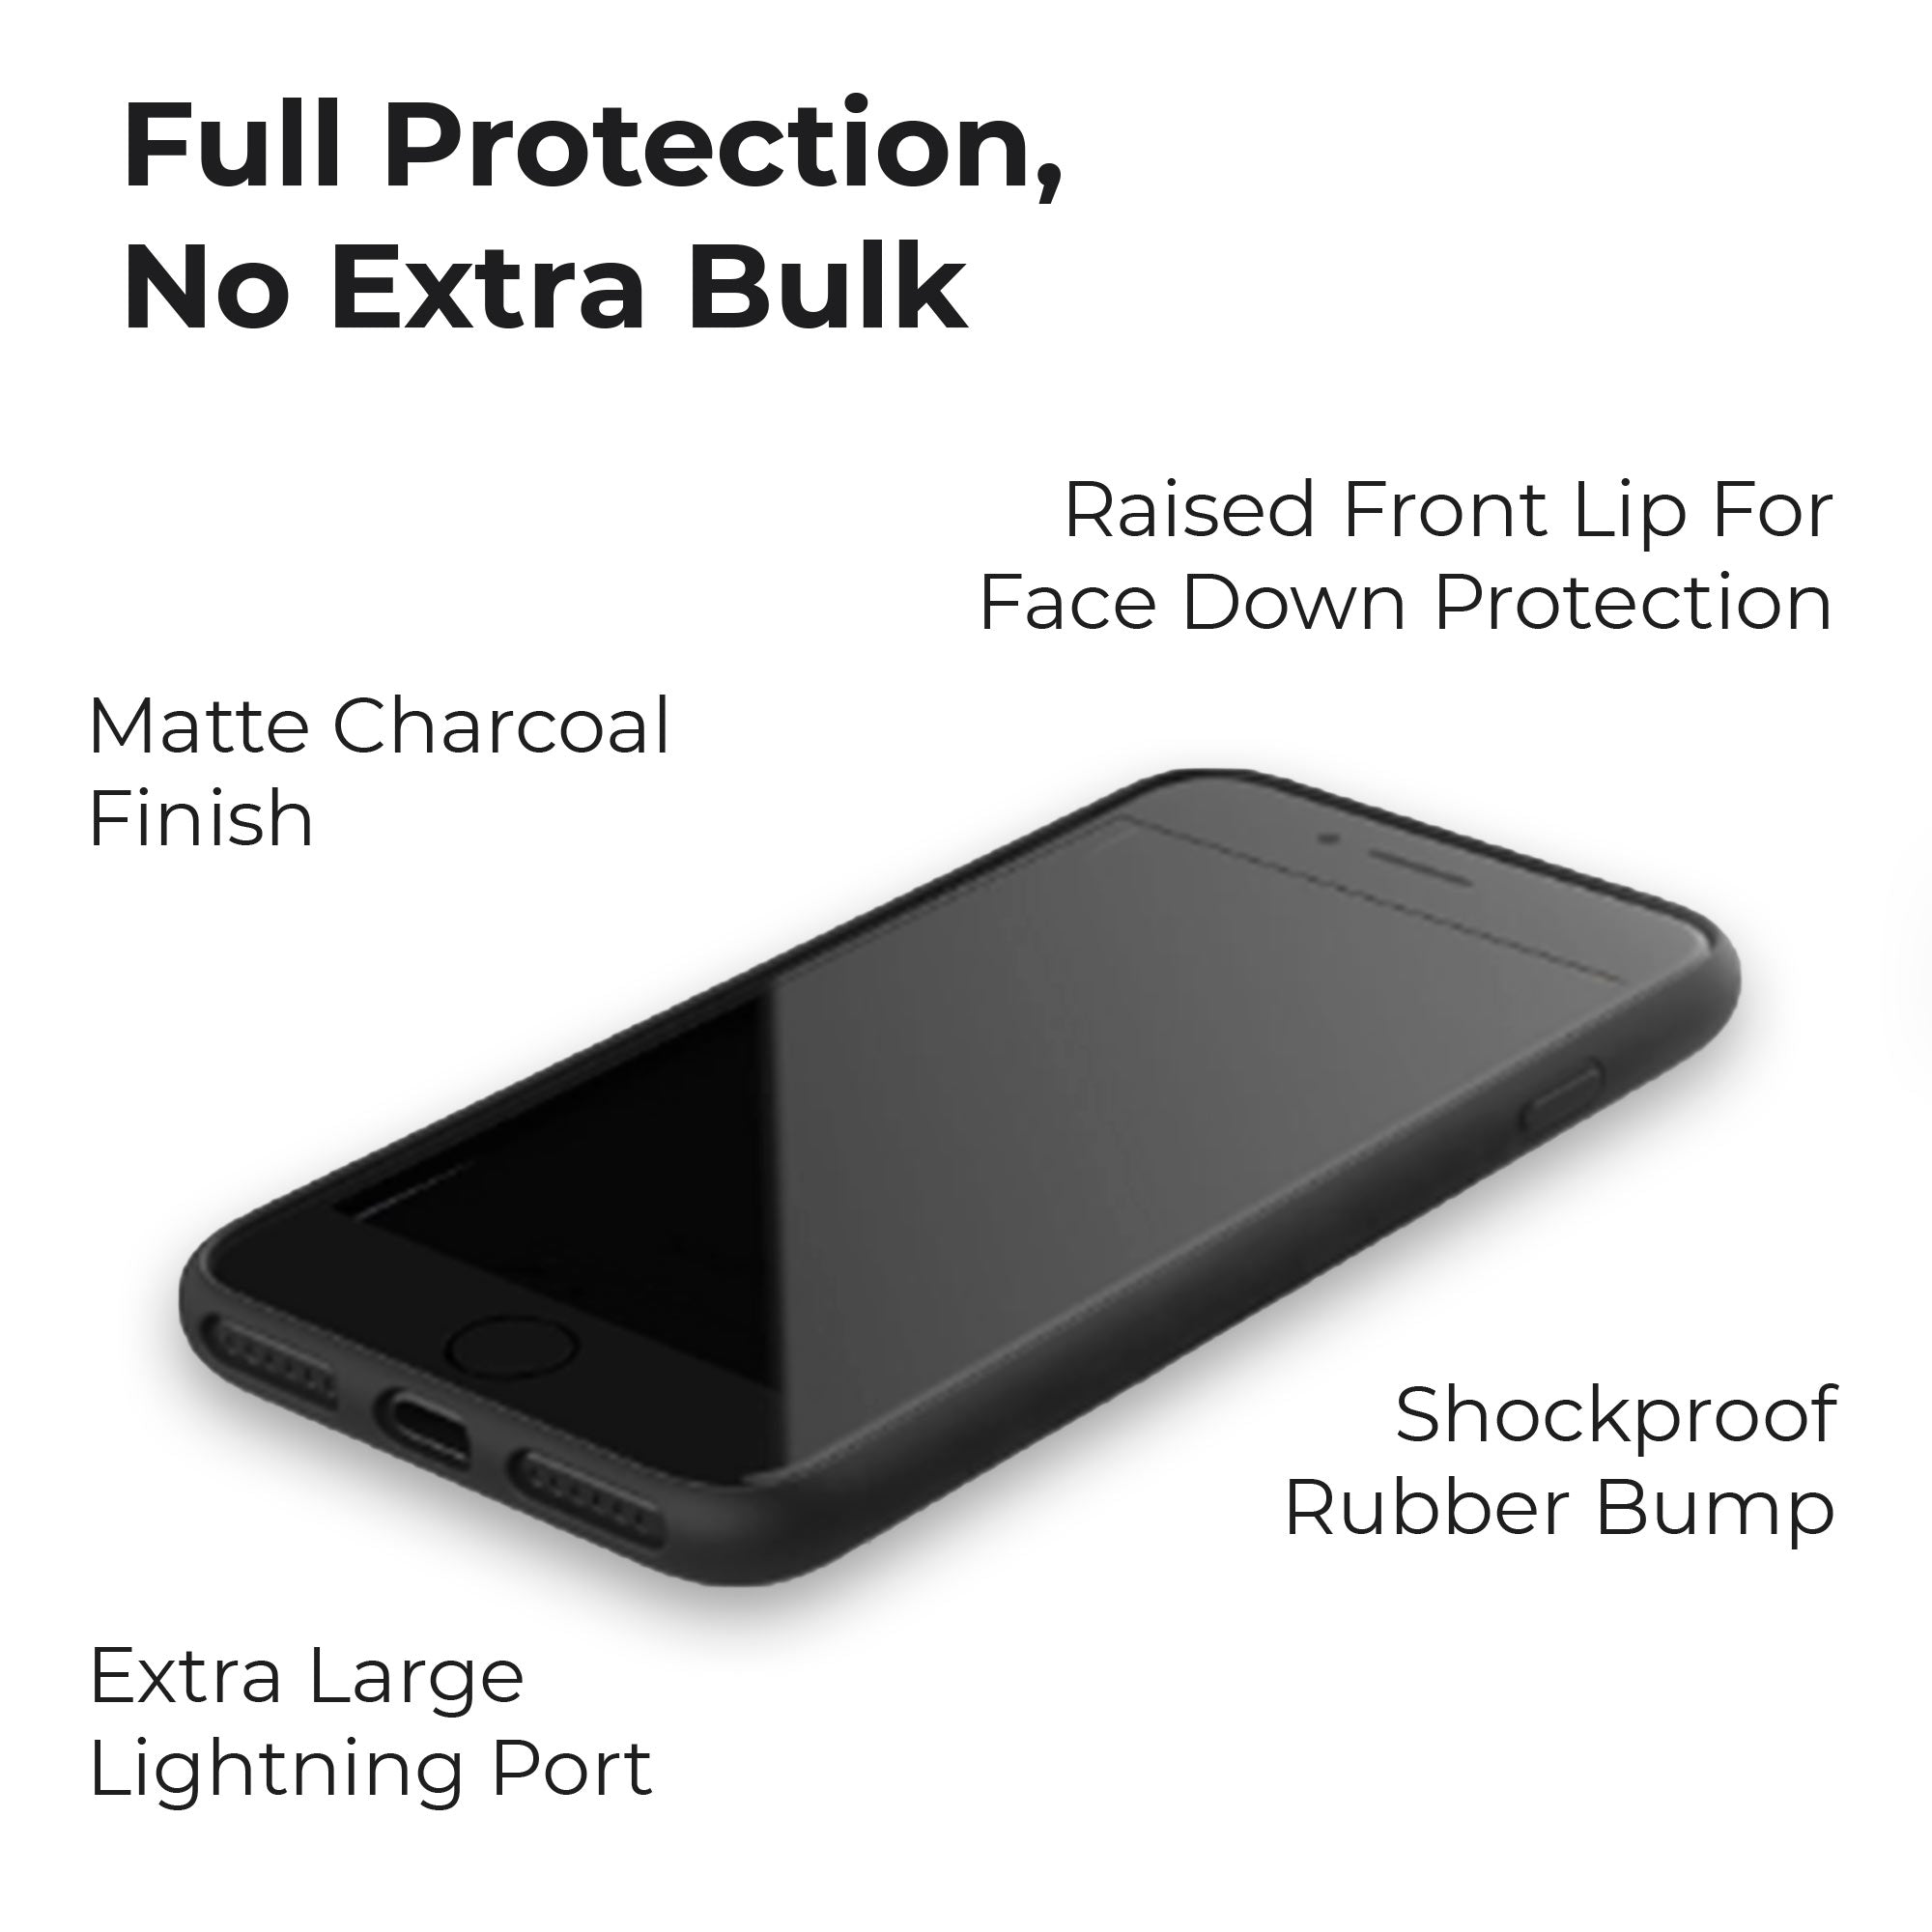 Full Protection and Durable Phone Case